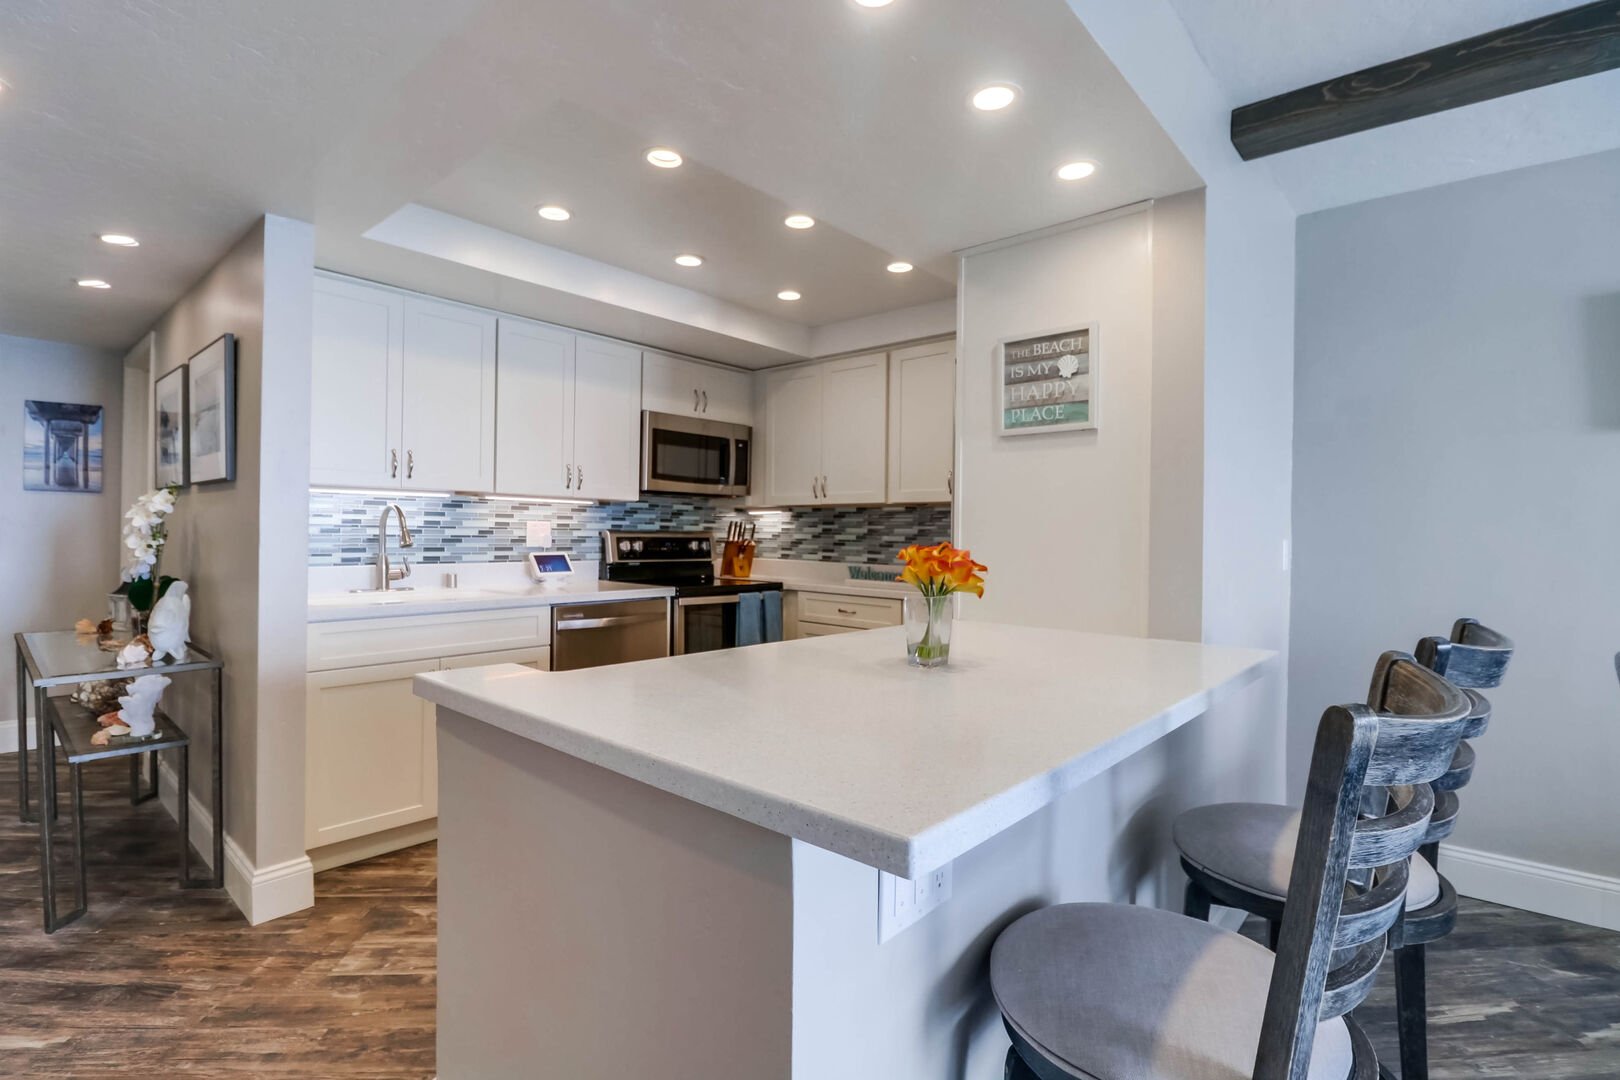 Kitchen with quartz countertops, stainless steel appliances, Keurig coffee maker, blender, toaster, recessed lighting